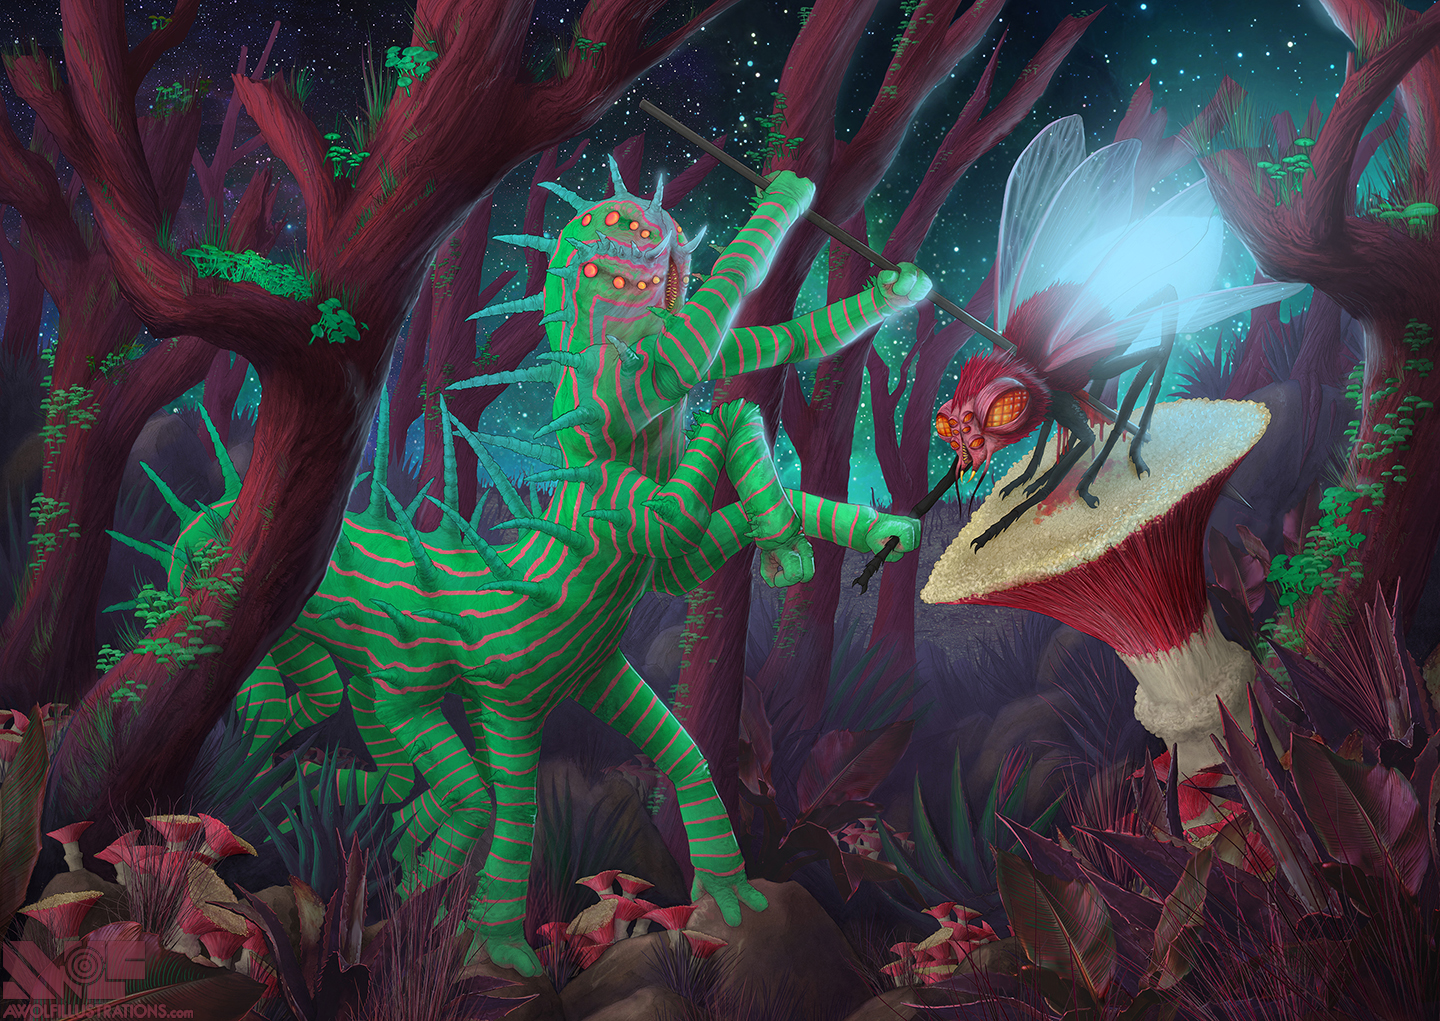 A digital artwork of a giant alien caterpillar hunting a luminescent fly with a spear at night. Available as a jigsaw puzzle